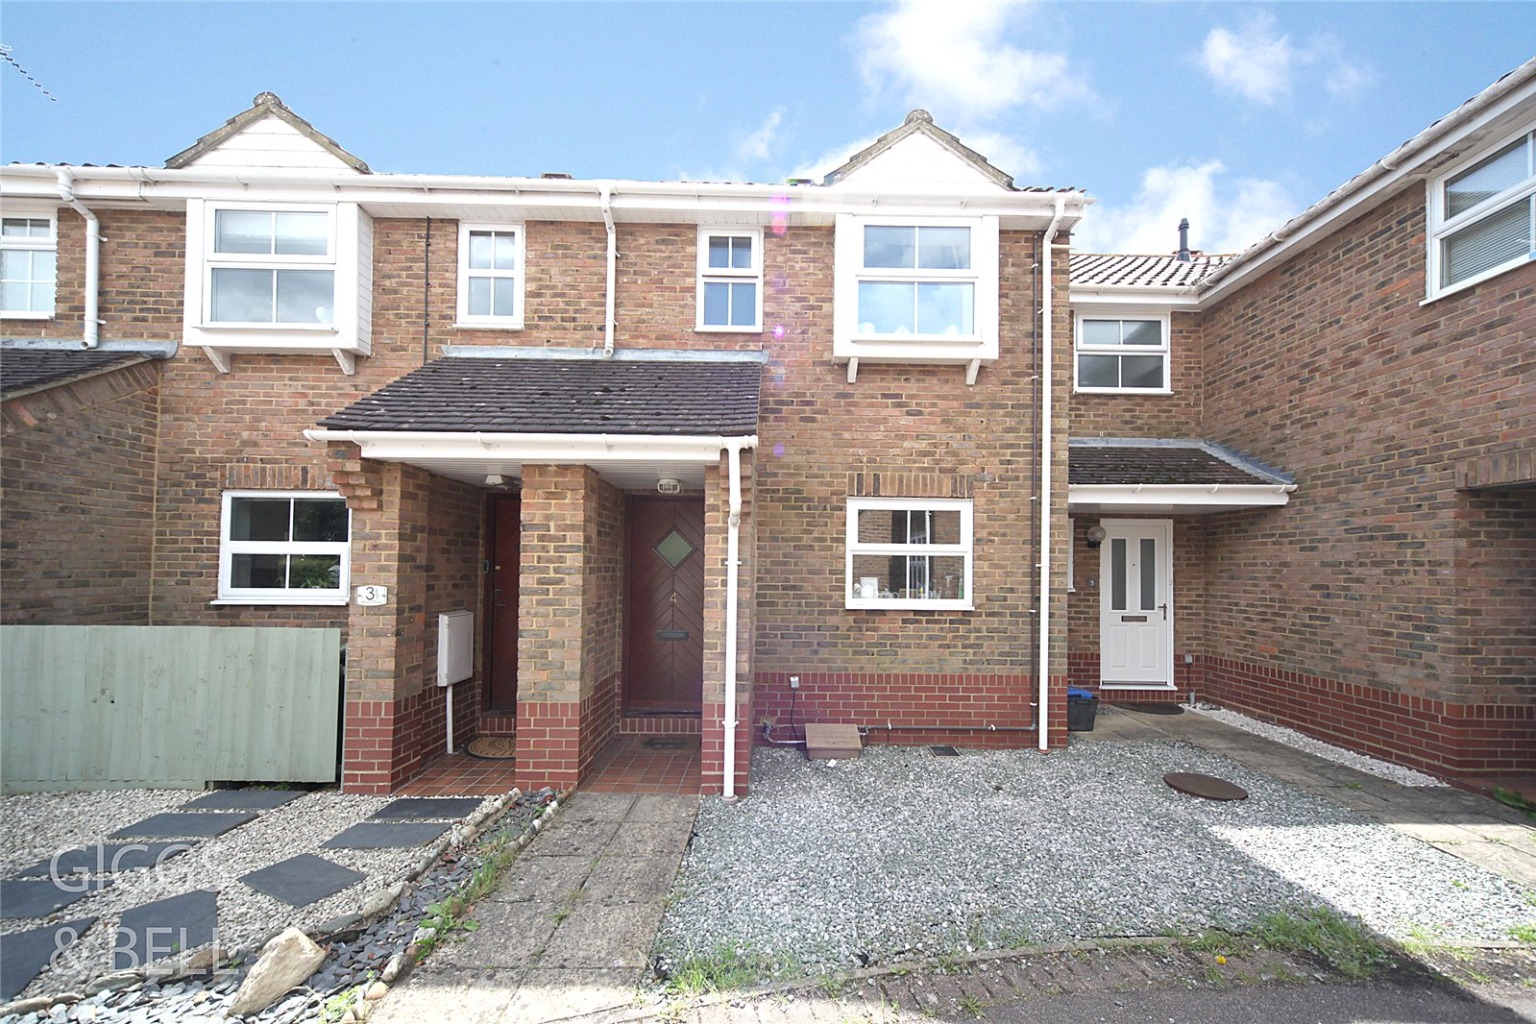 2 bed terraced house for sale in Edkins Close, Luton  - Property Image 1